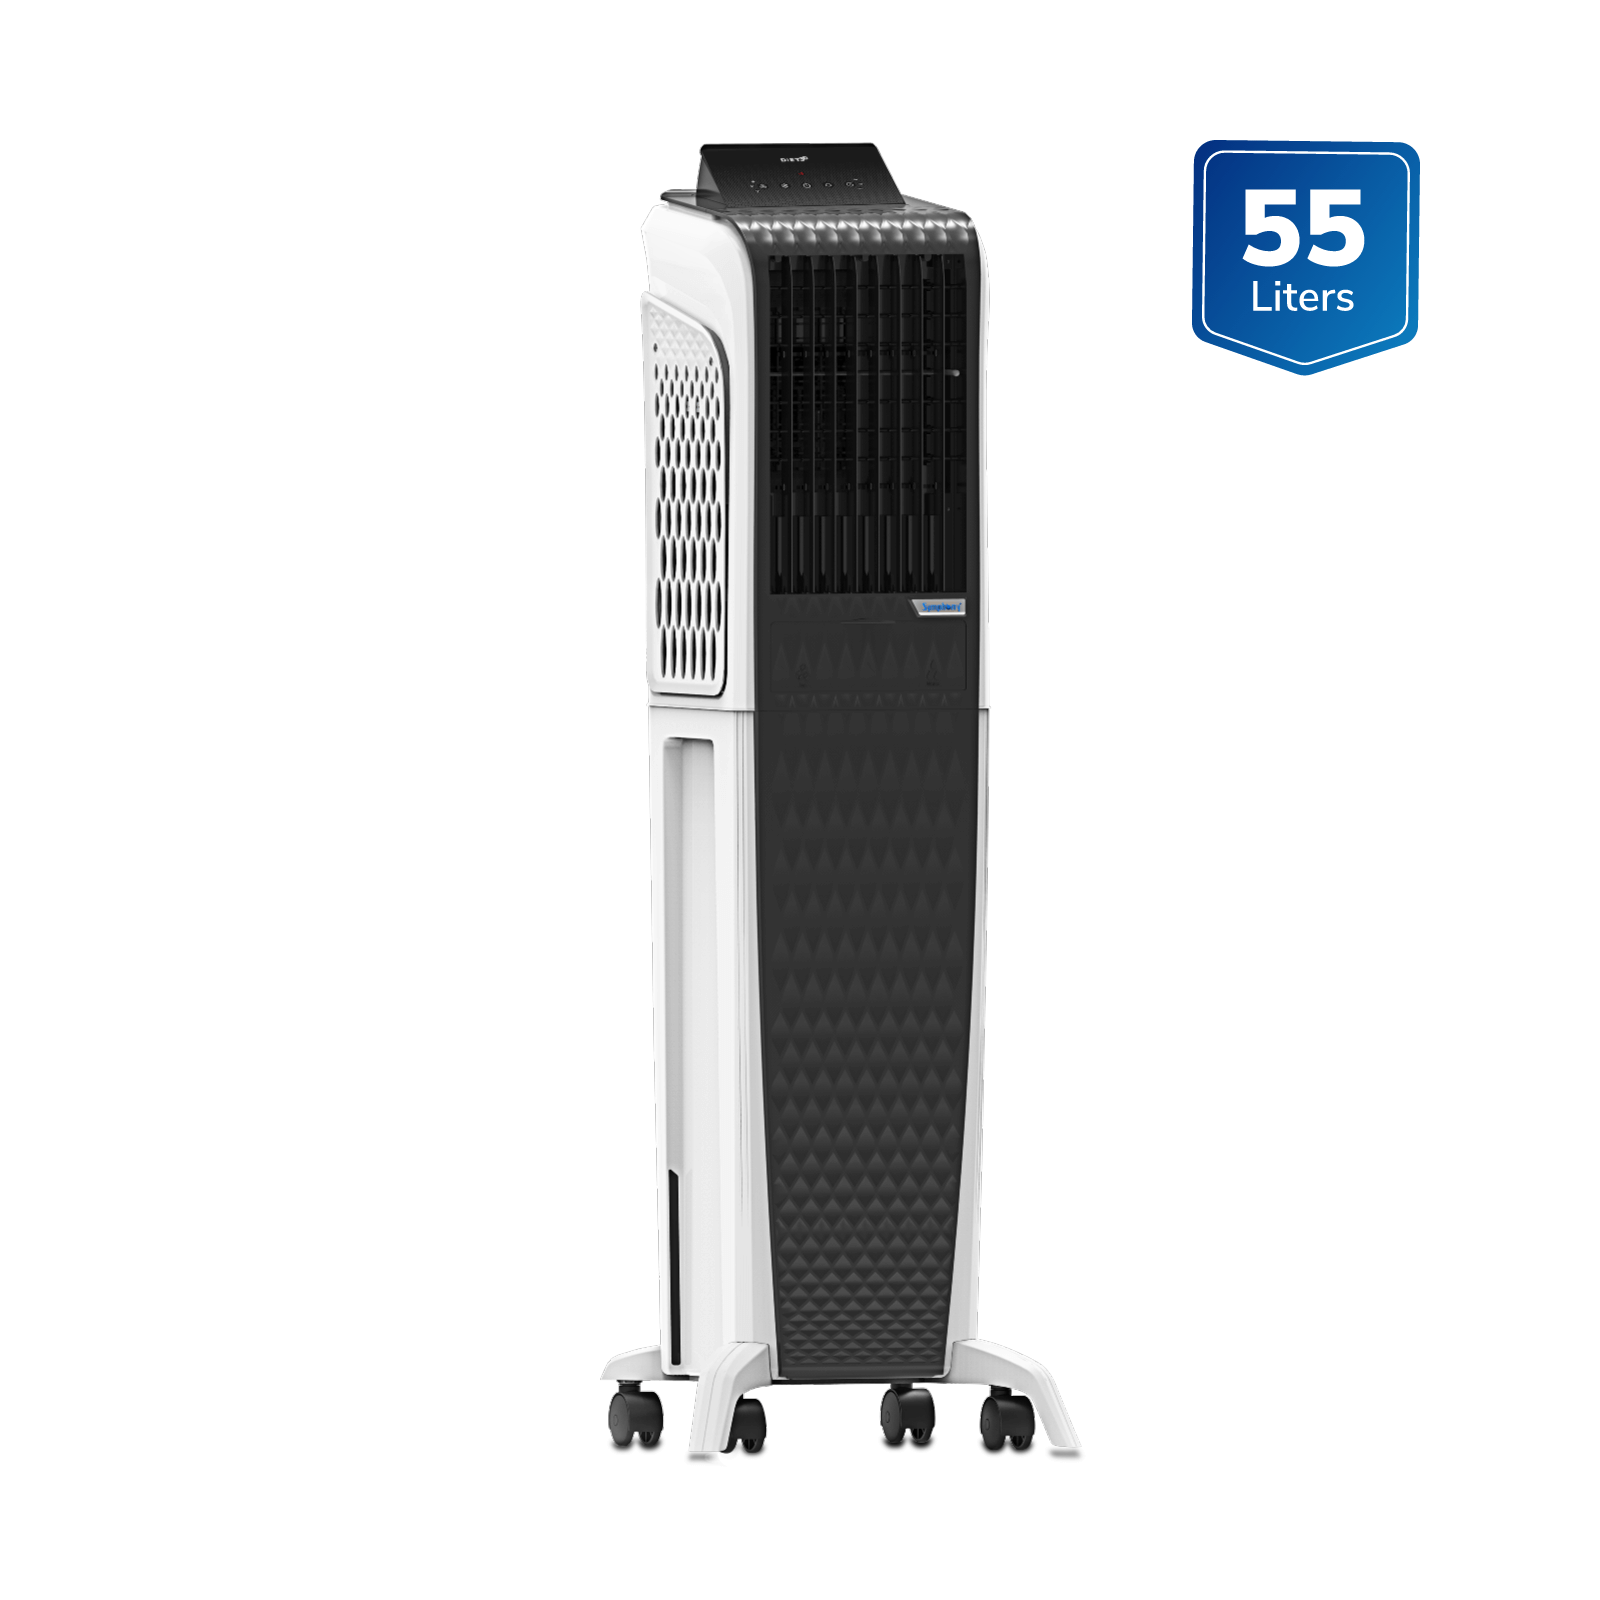 Diet 3D 55i+ Air Cooler 55-litres with Full Function Remote